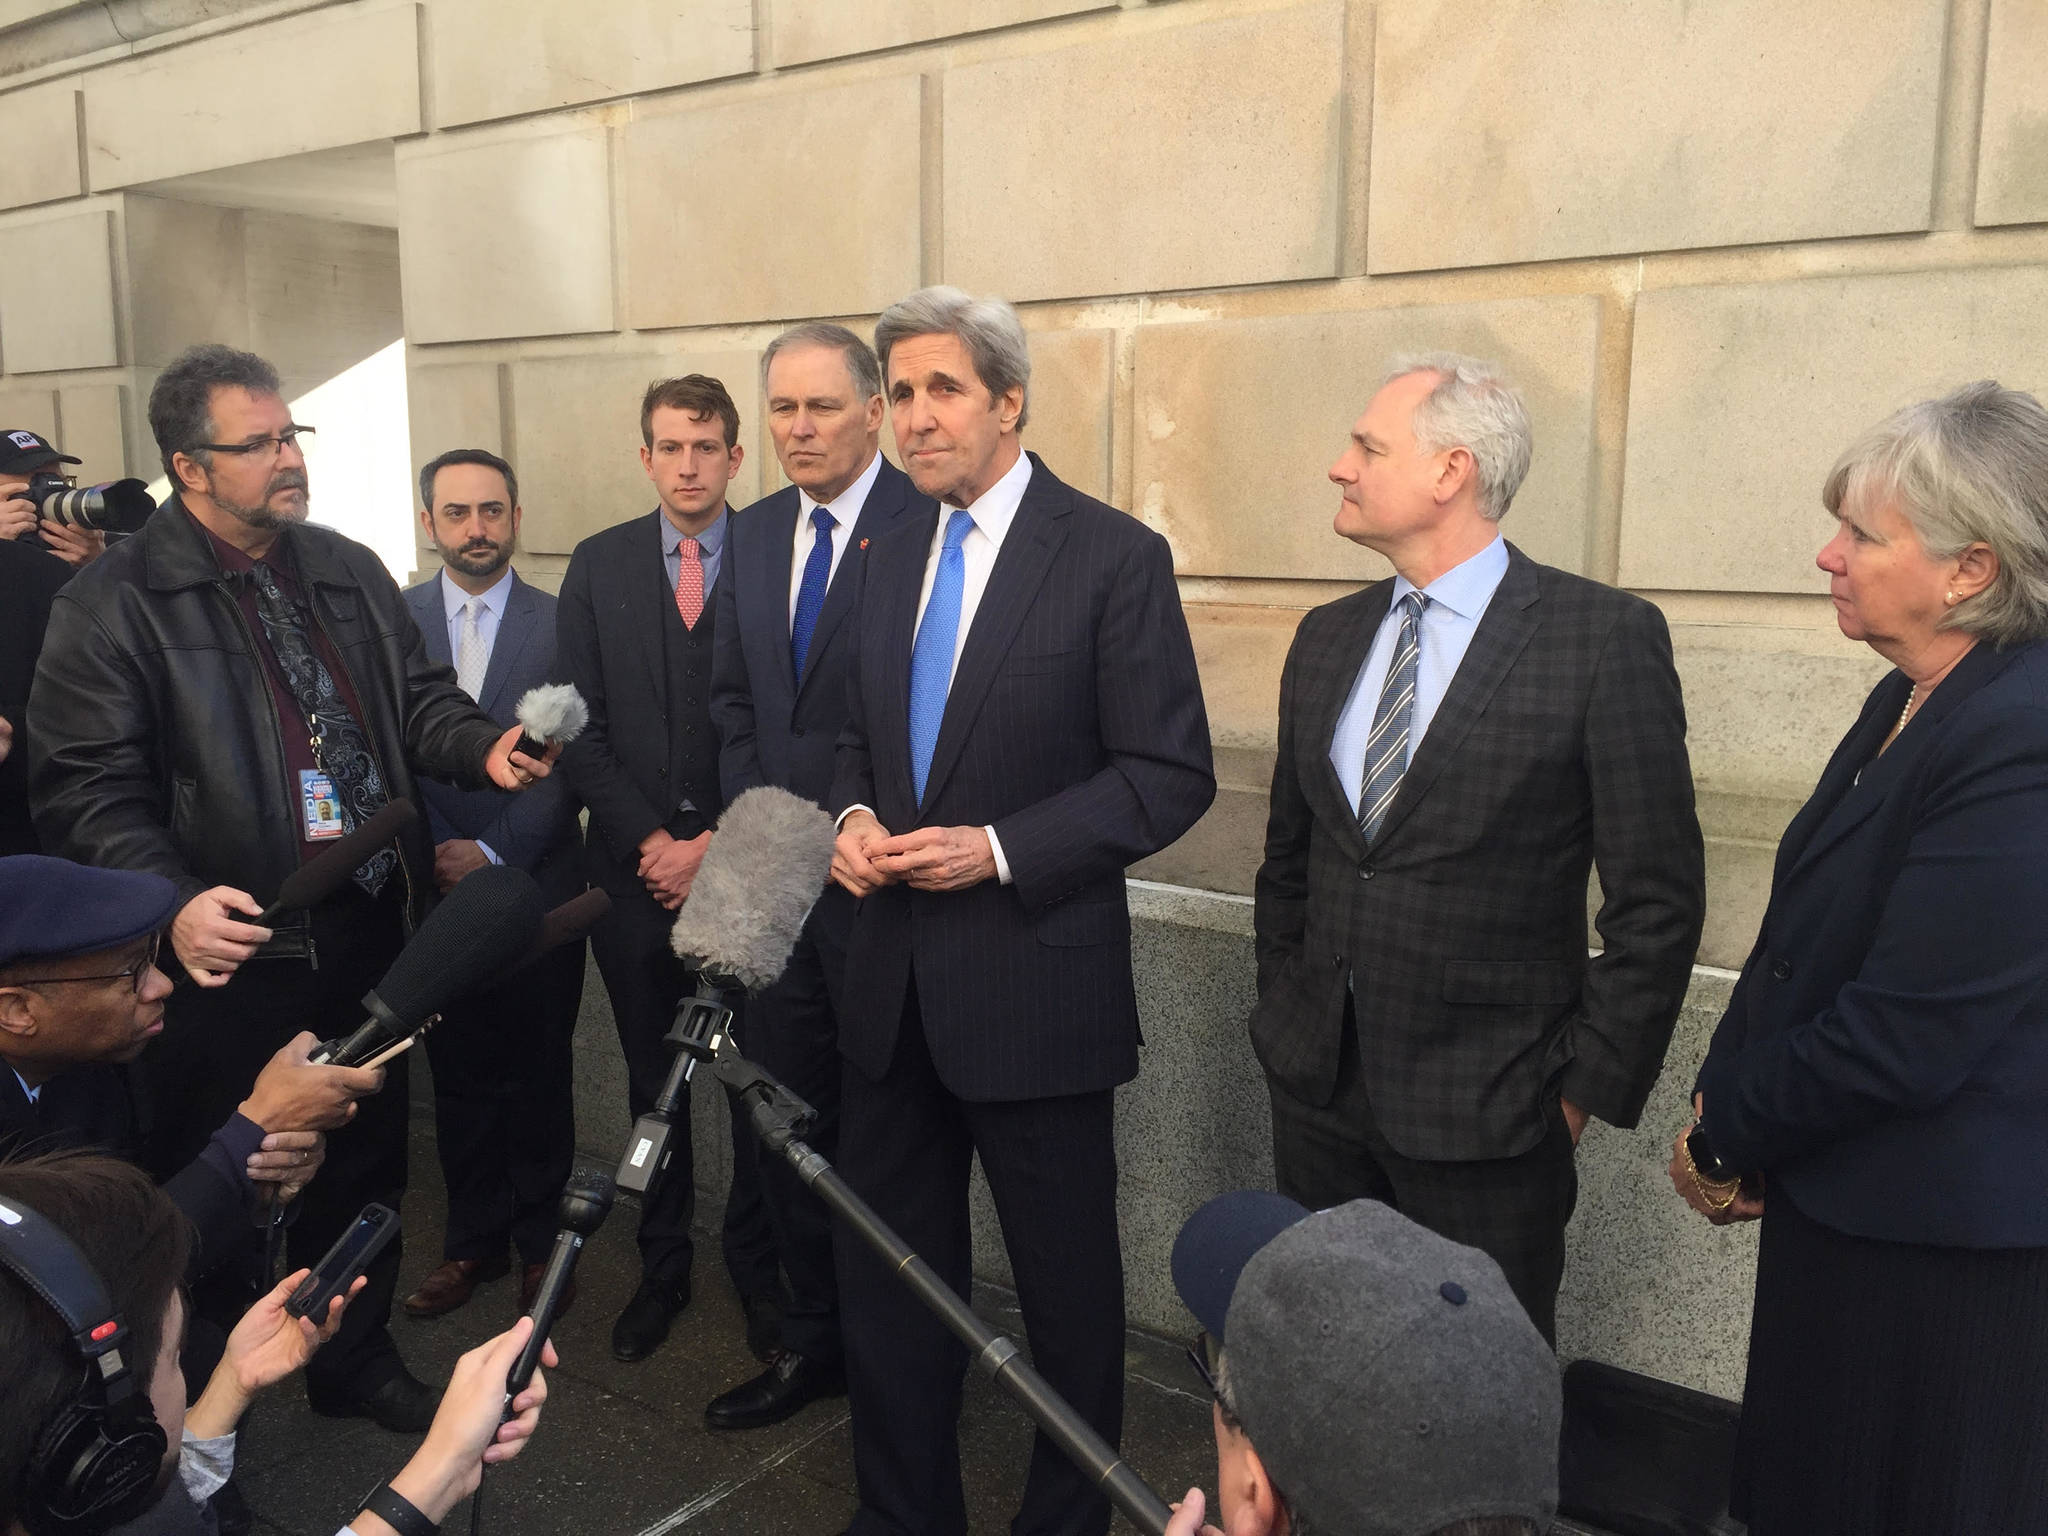 Former U.S. Secretary of State John Kerry visited Olympia Tuesday to voice support for Gov. Inslee’s carbon tax proposal. Photo by Josh Kelety